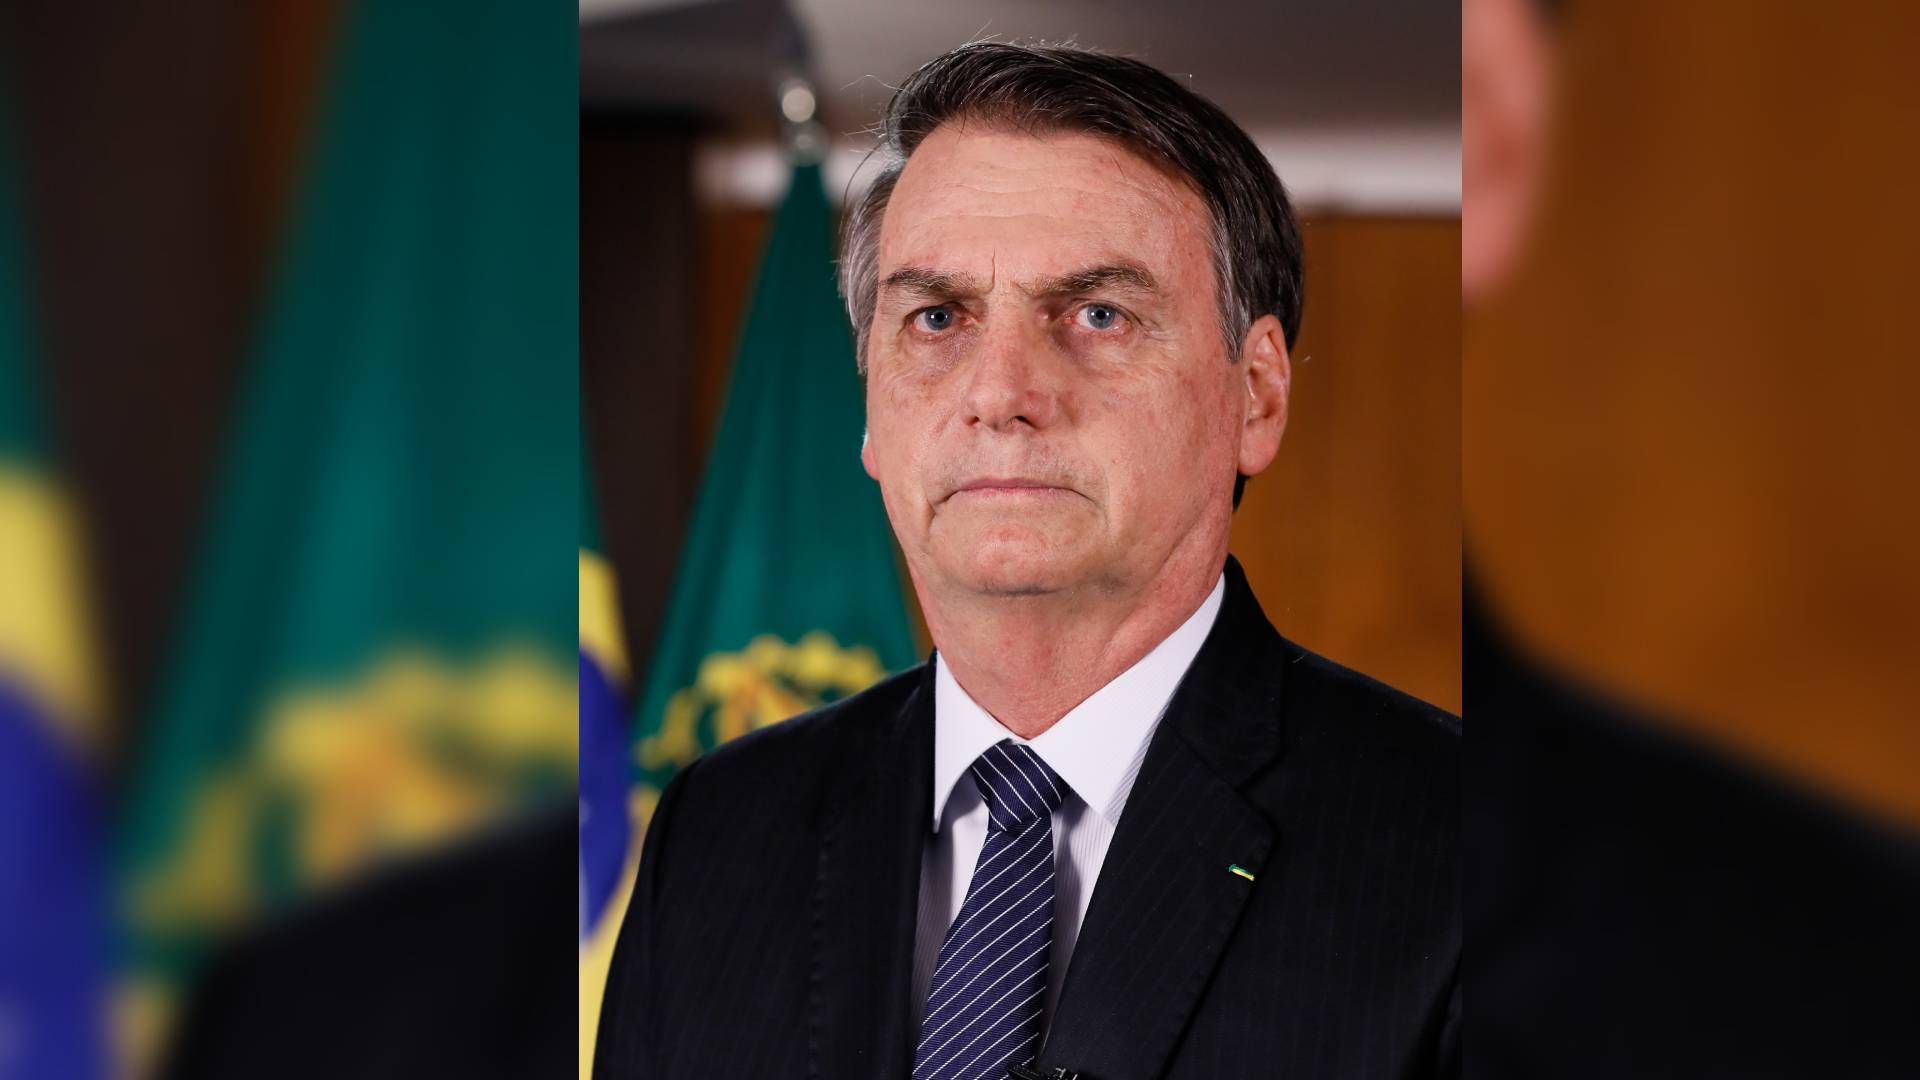 Brazil intelligence agency's second-in-command fired in illegal spying probe